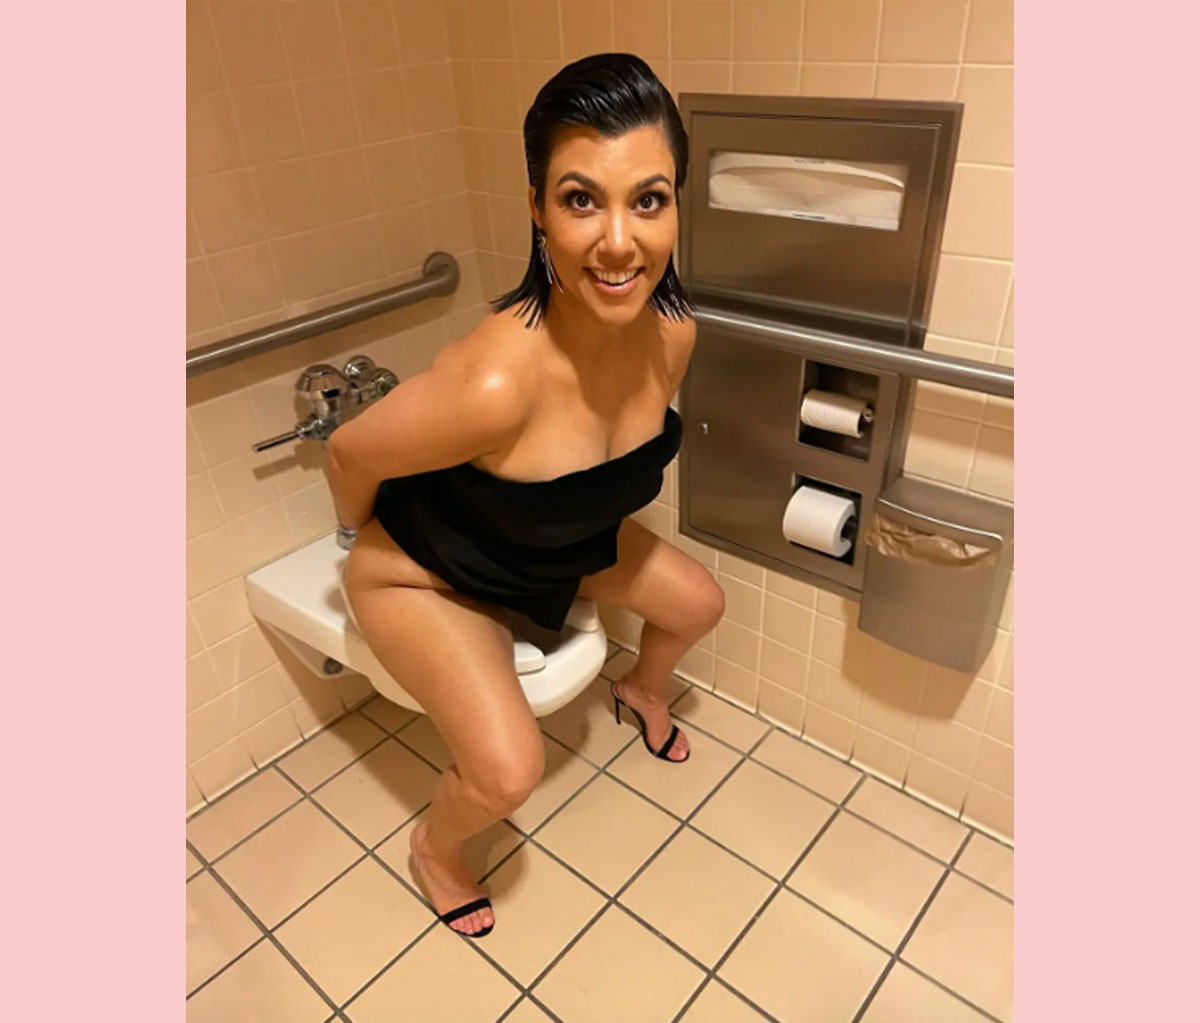 OMG Travis Barker Posted A Pic Of Kourtney Kardashian ON THE TOILET For Her Birthday!